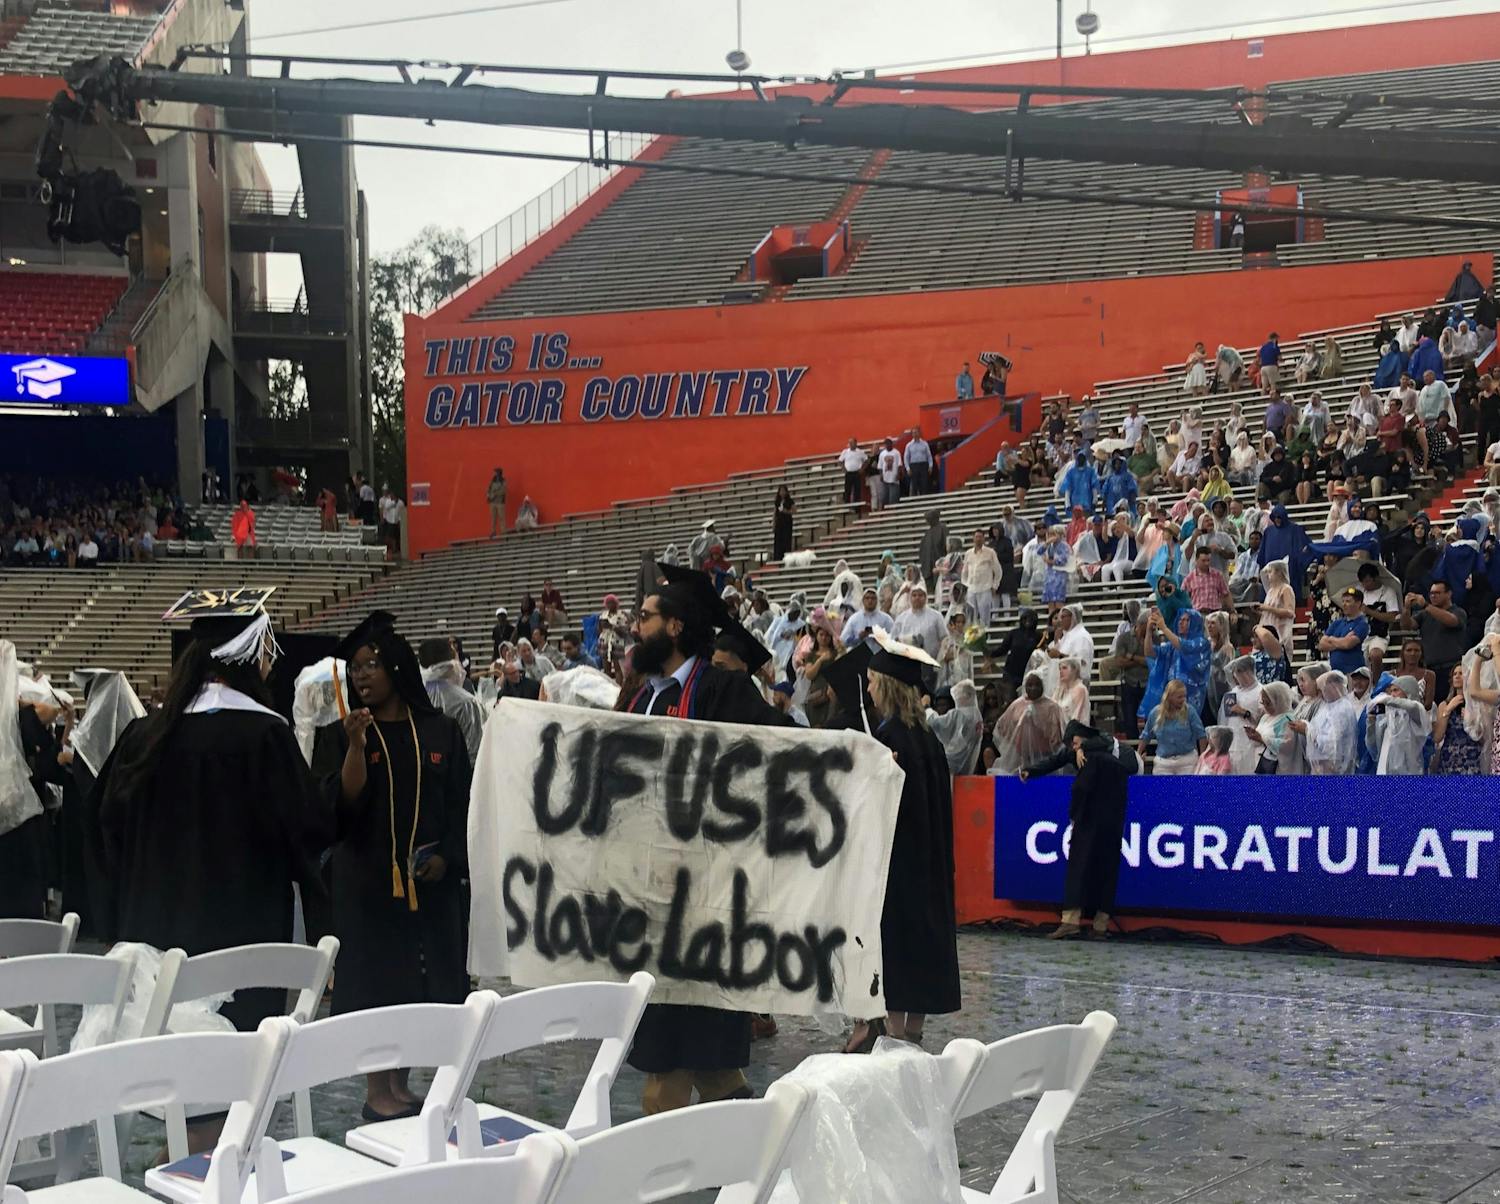 Syed Muhammad Omar holds a banner during the College of Liberal Arts and Sciences commencement ceremony on Sunday. Omar, a 27-year-old UF psychology bachelor’s graduate, said he is involved with Divest UF.